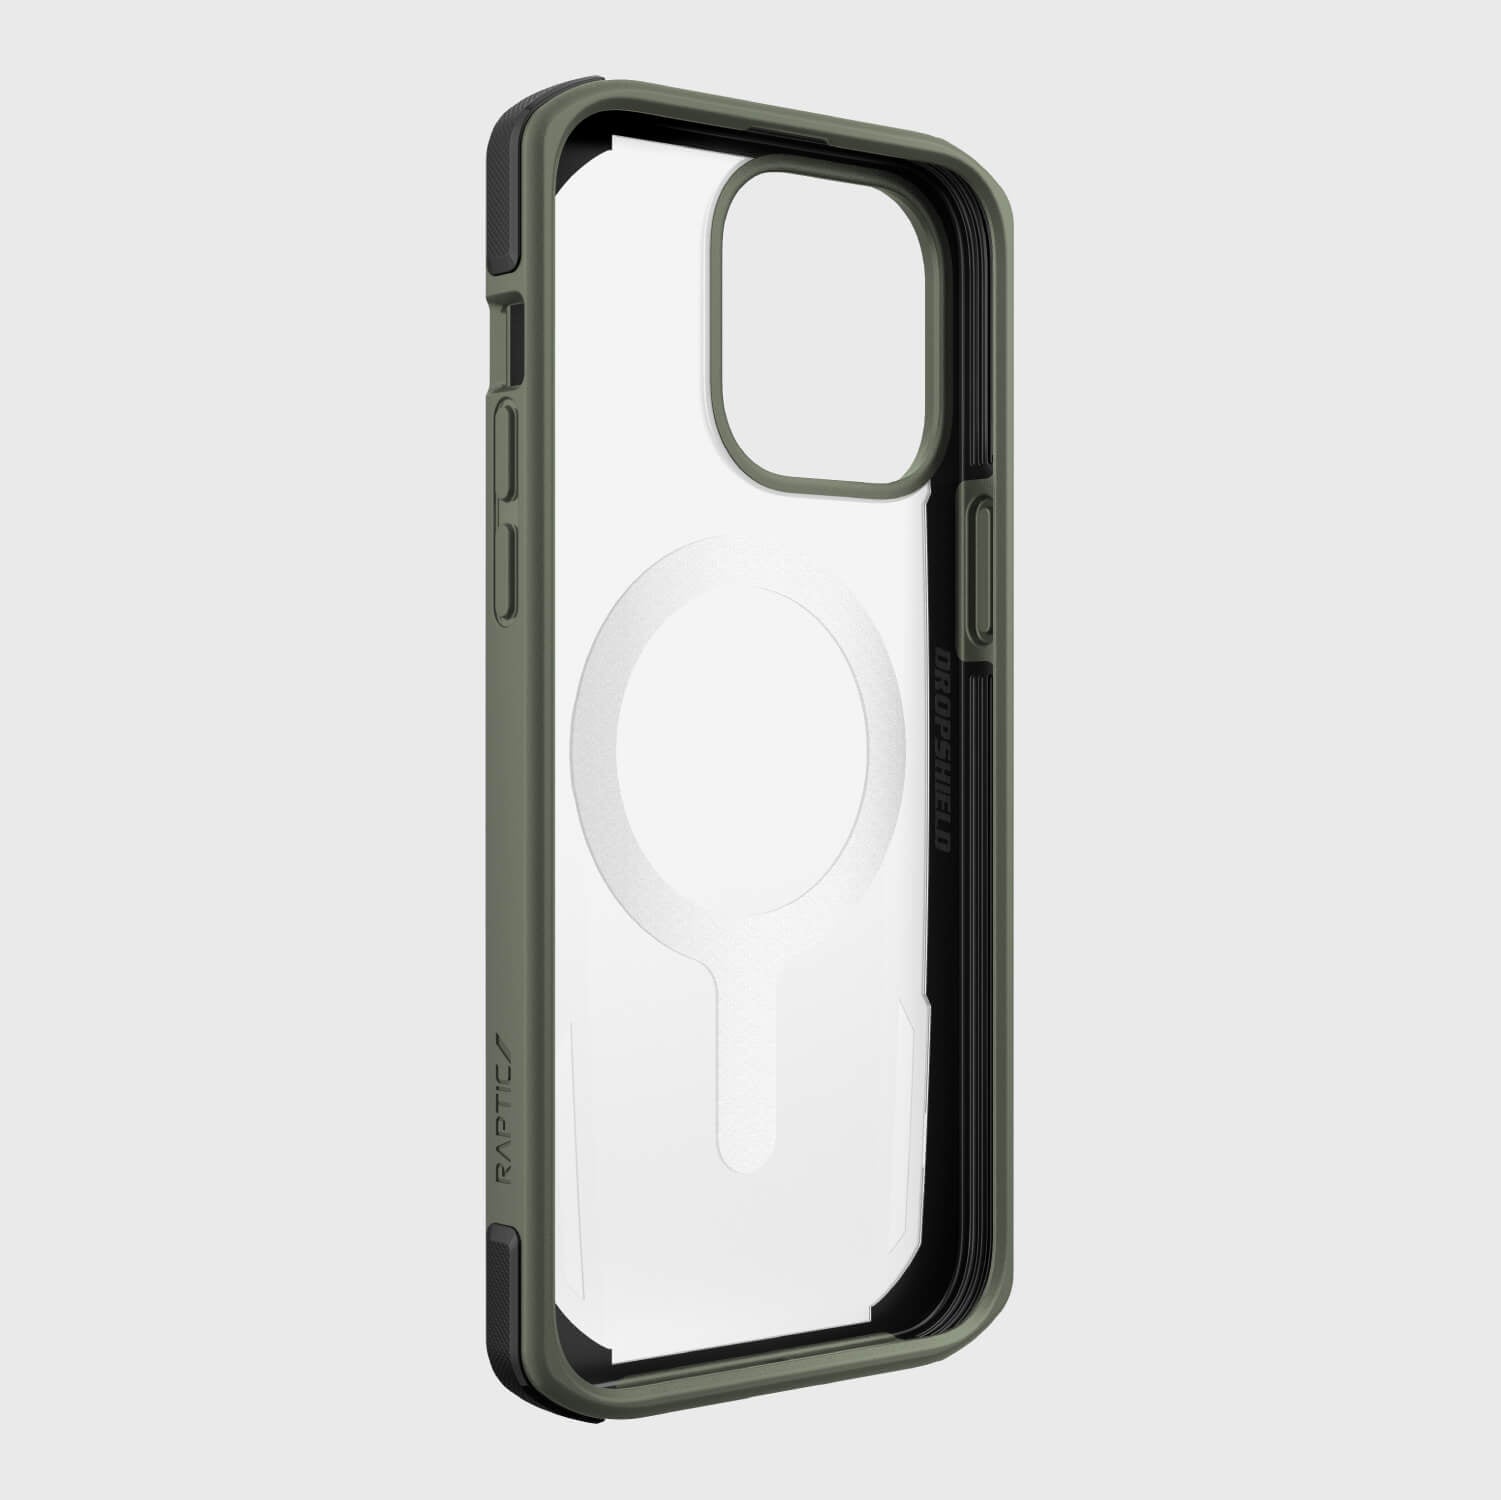 Raptic iPhone 14/15 Pro Max case ~ olive green with drop protection - Secure built for MagSafe.